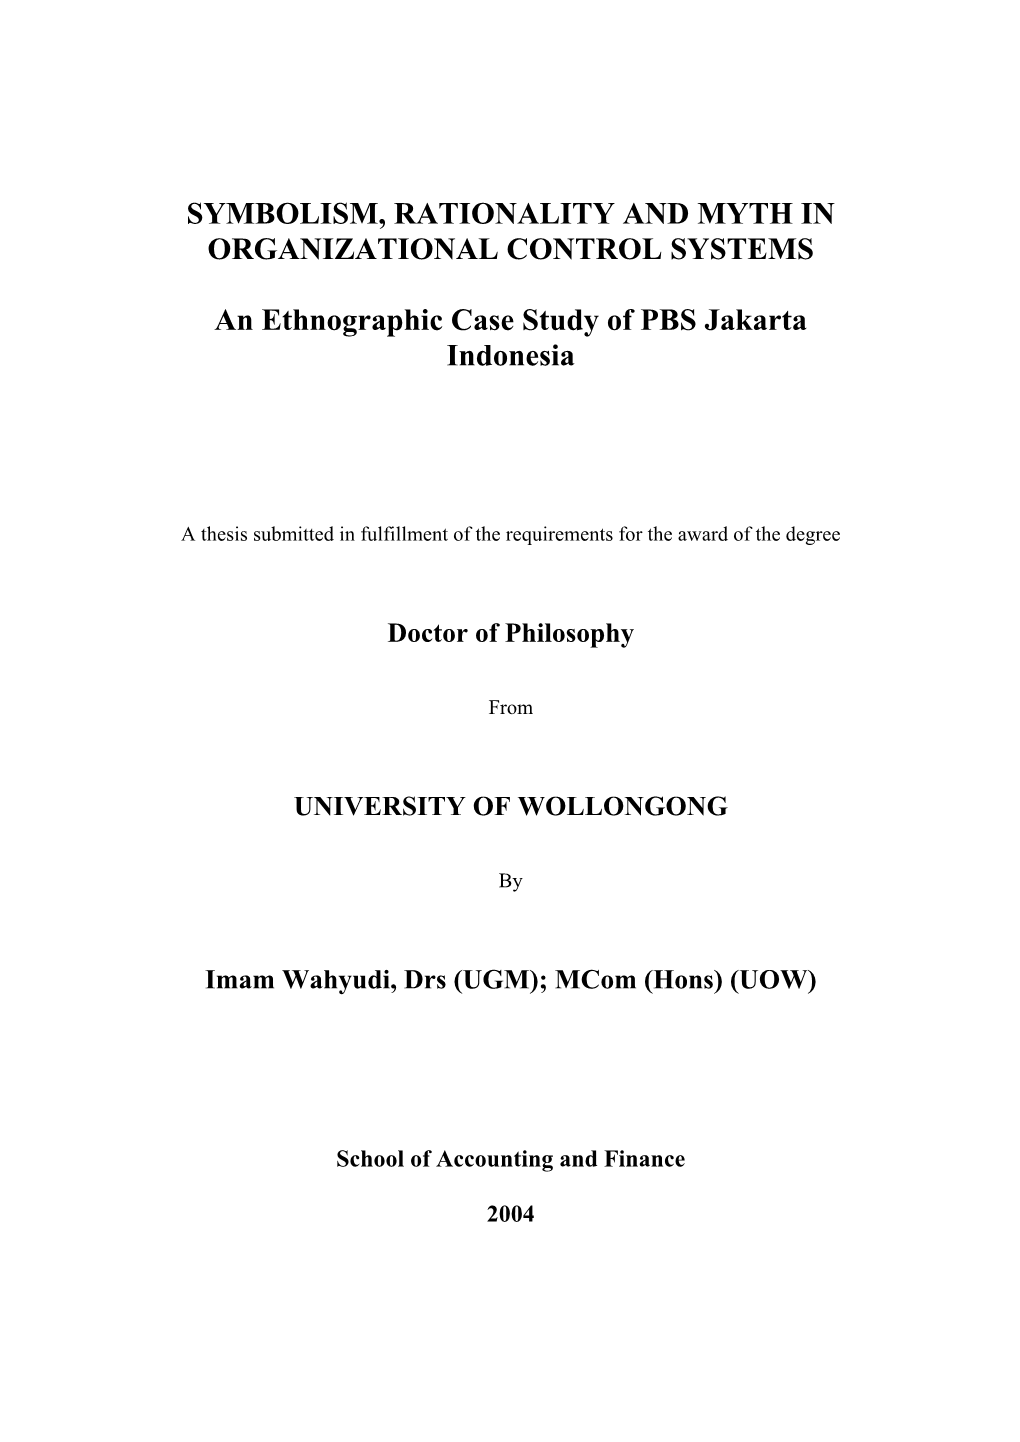 Symbolism, Rationality and Myth in Organizational Control Systems